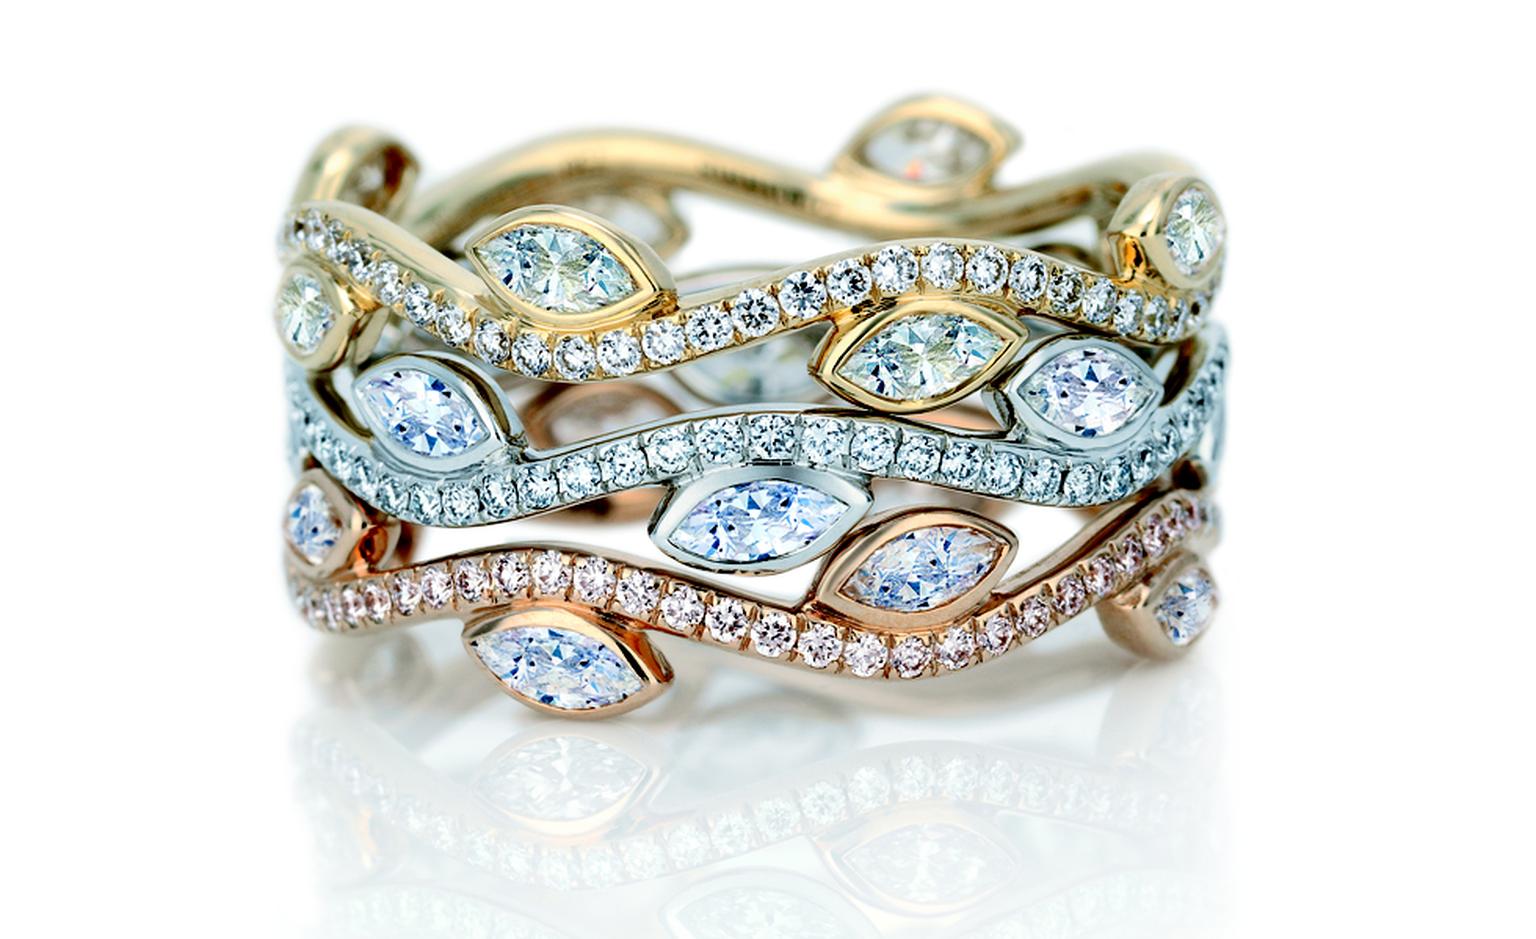 DE BEERS, Three Adonis Rose Bands in yellow, platinum and pink gold. Prices from £3,275